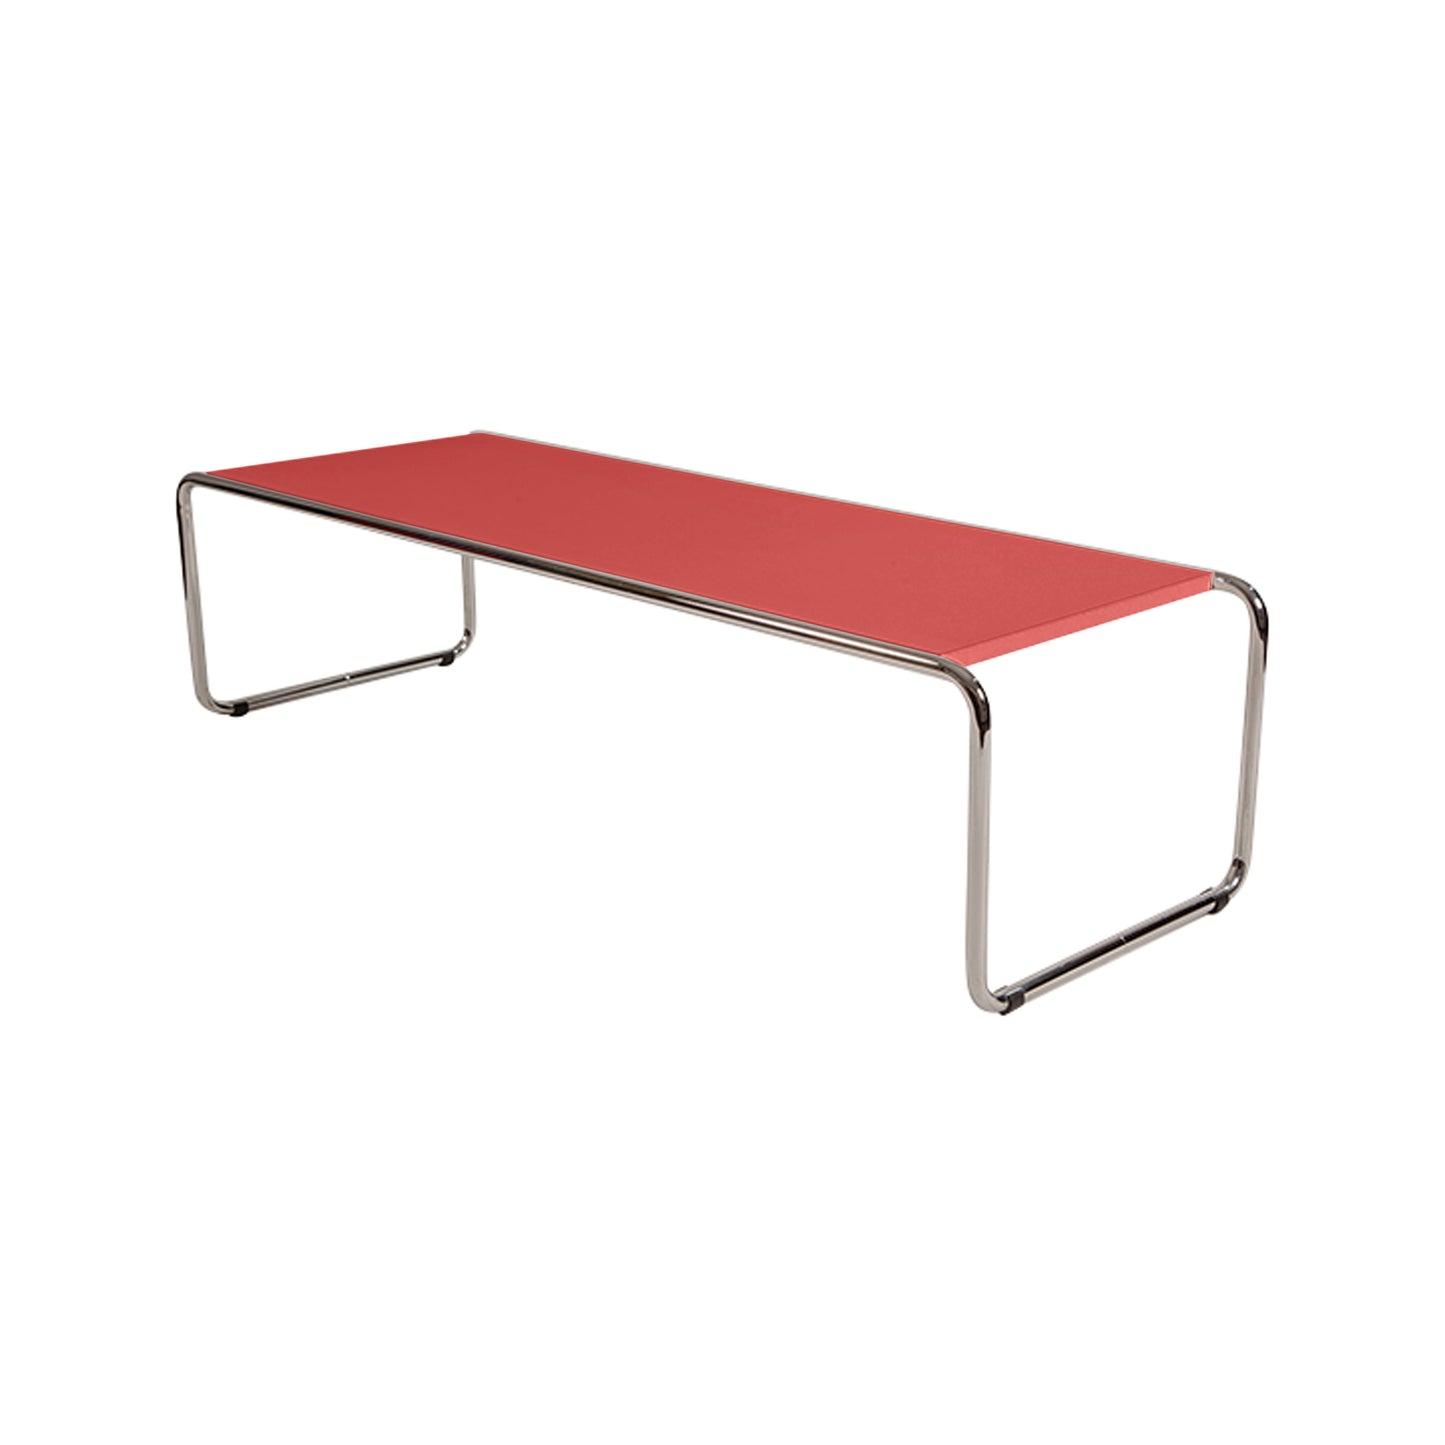 Laccio coffee table style | Red | Side